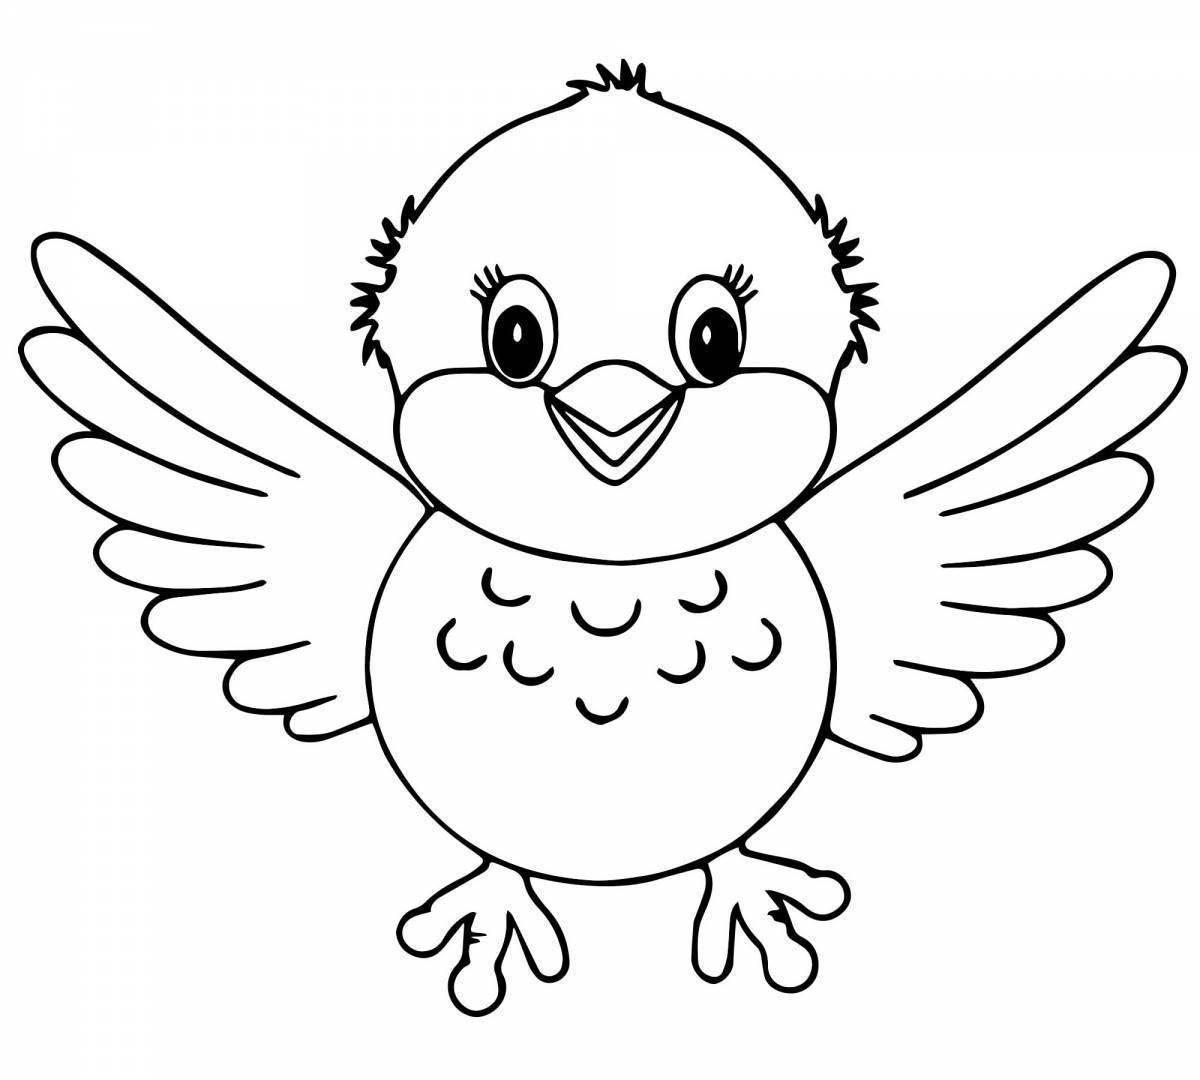 Sunny bird coloring book for kids